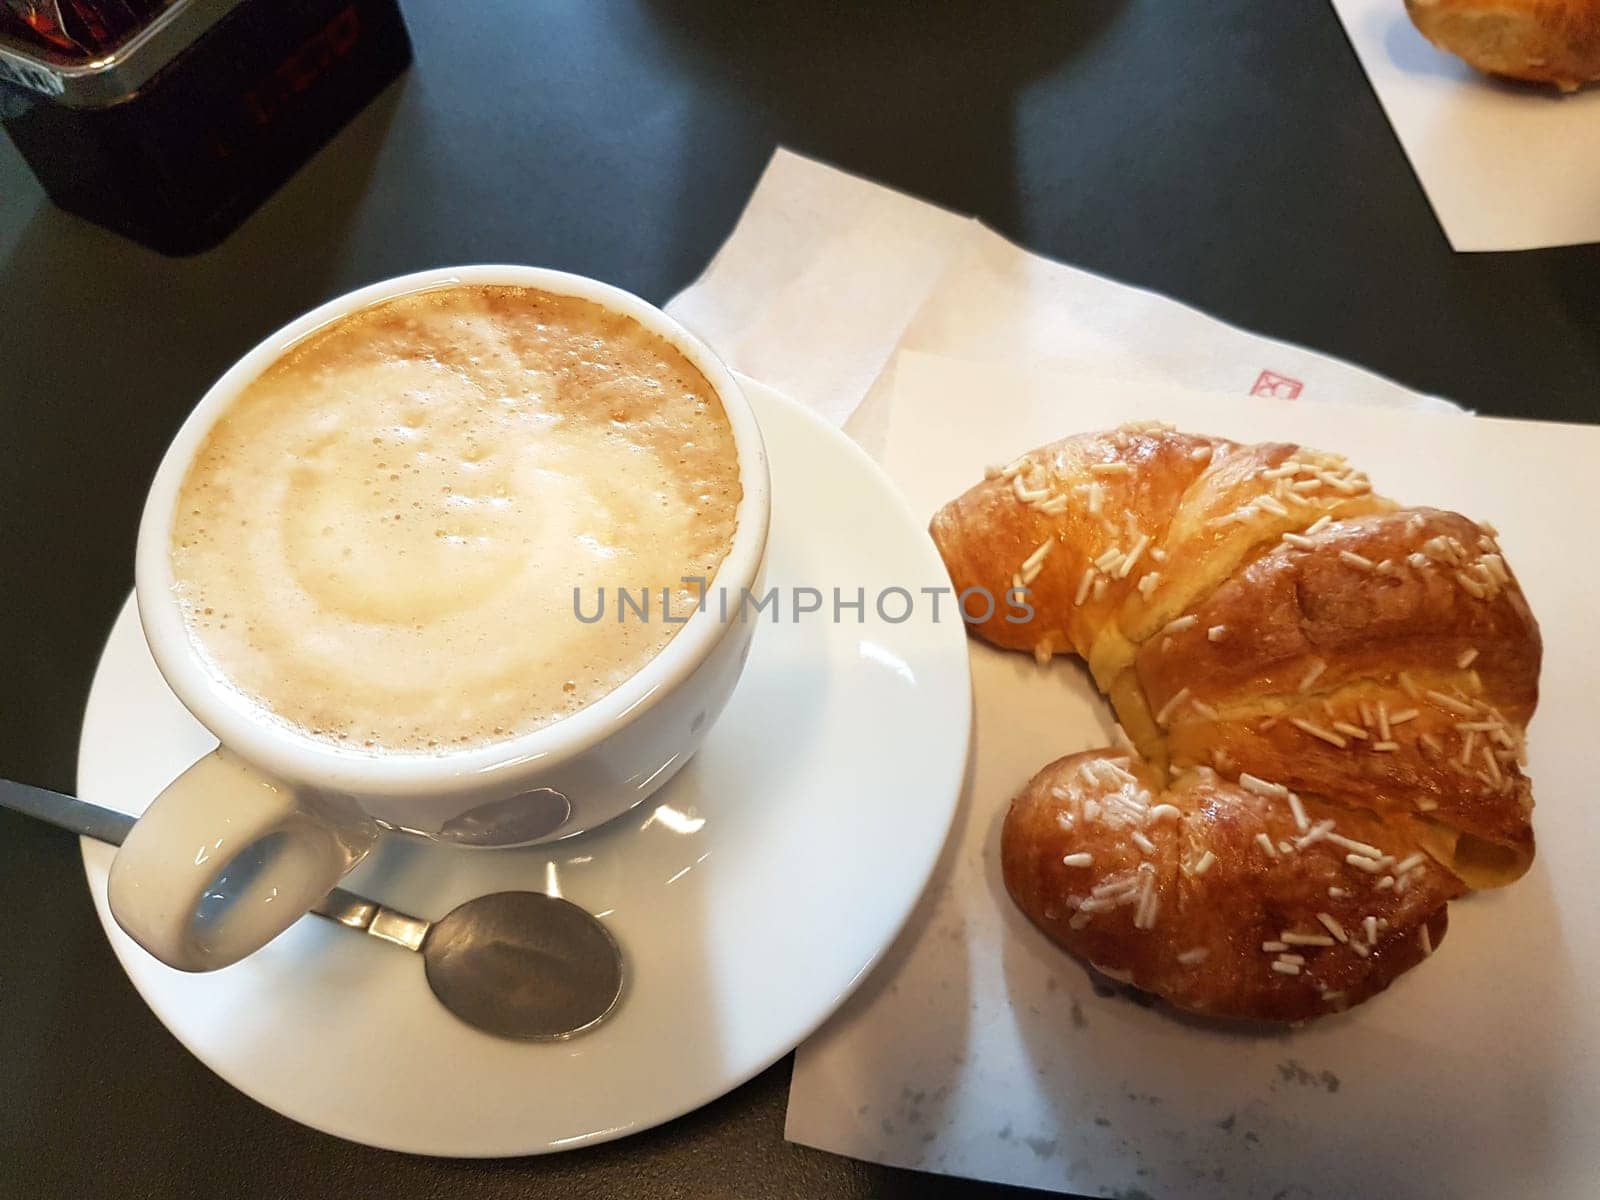 A traditional Italian breakfast with croissant and creamy cappuccino.